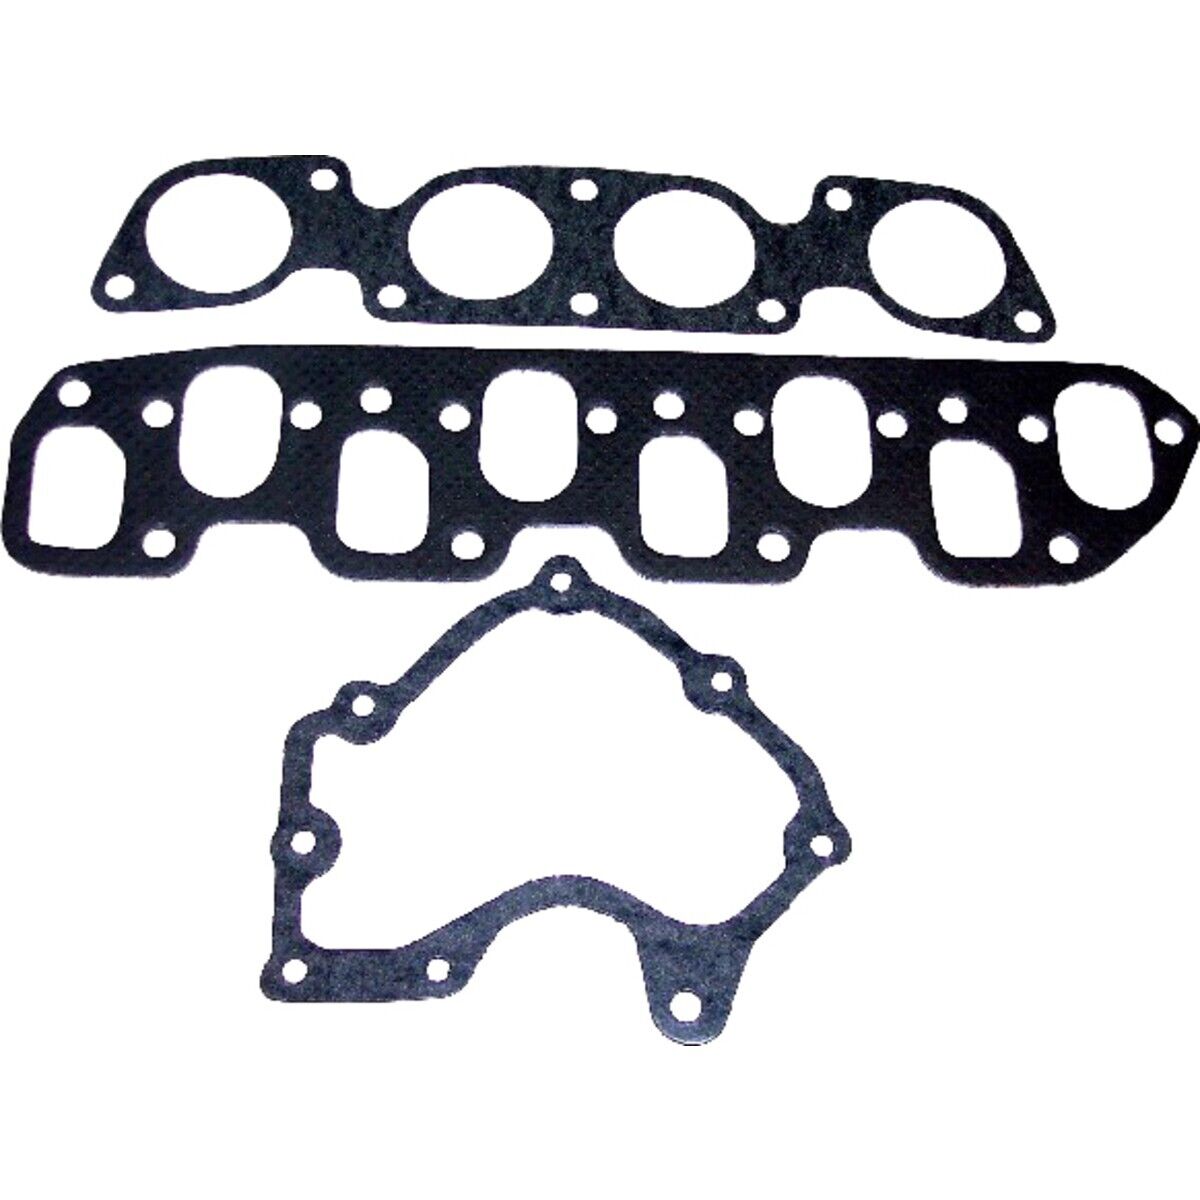 MG145 DNJ Intake Plenum Gaskets Set of 3 for Le Baron Town and Country Ram Van